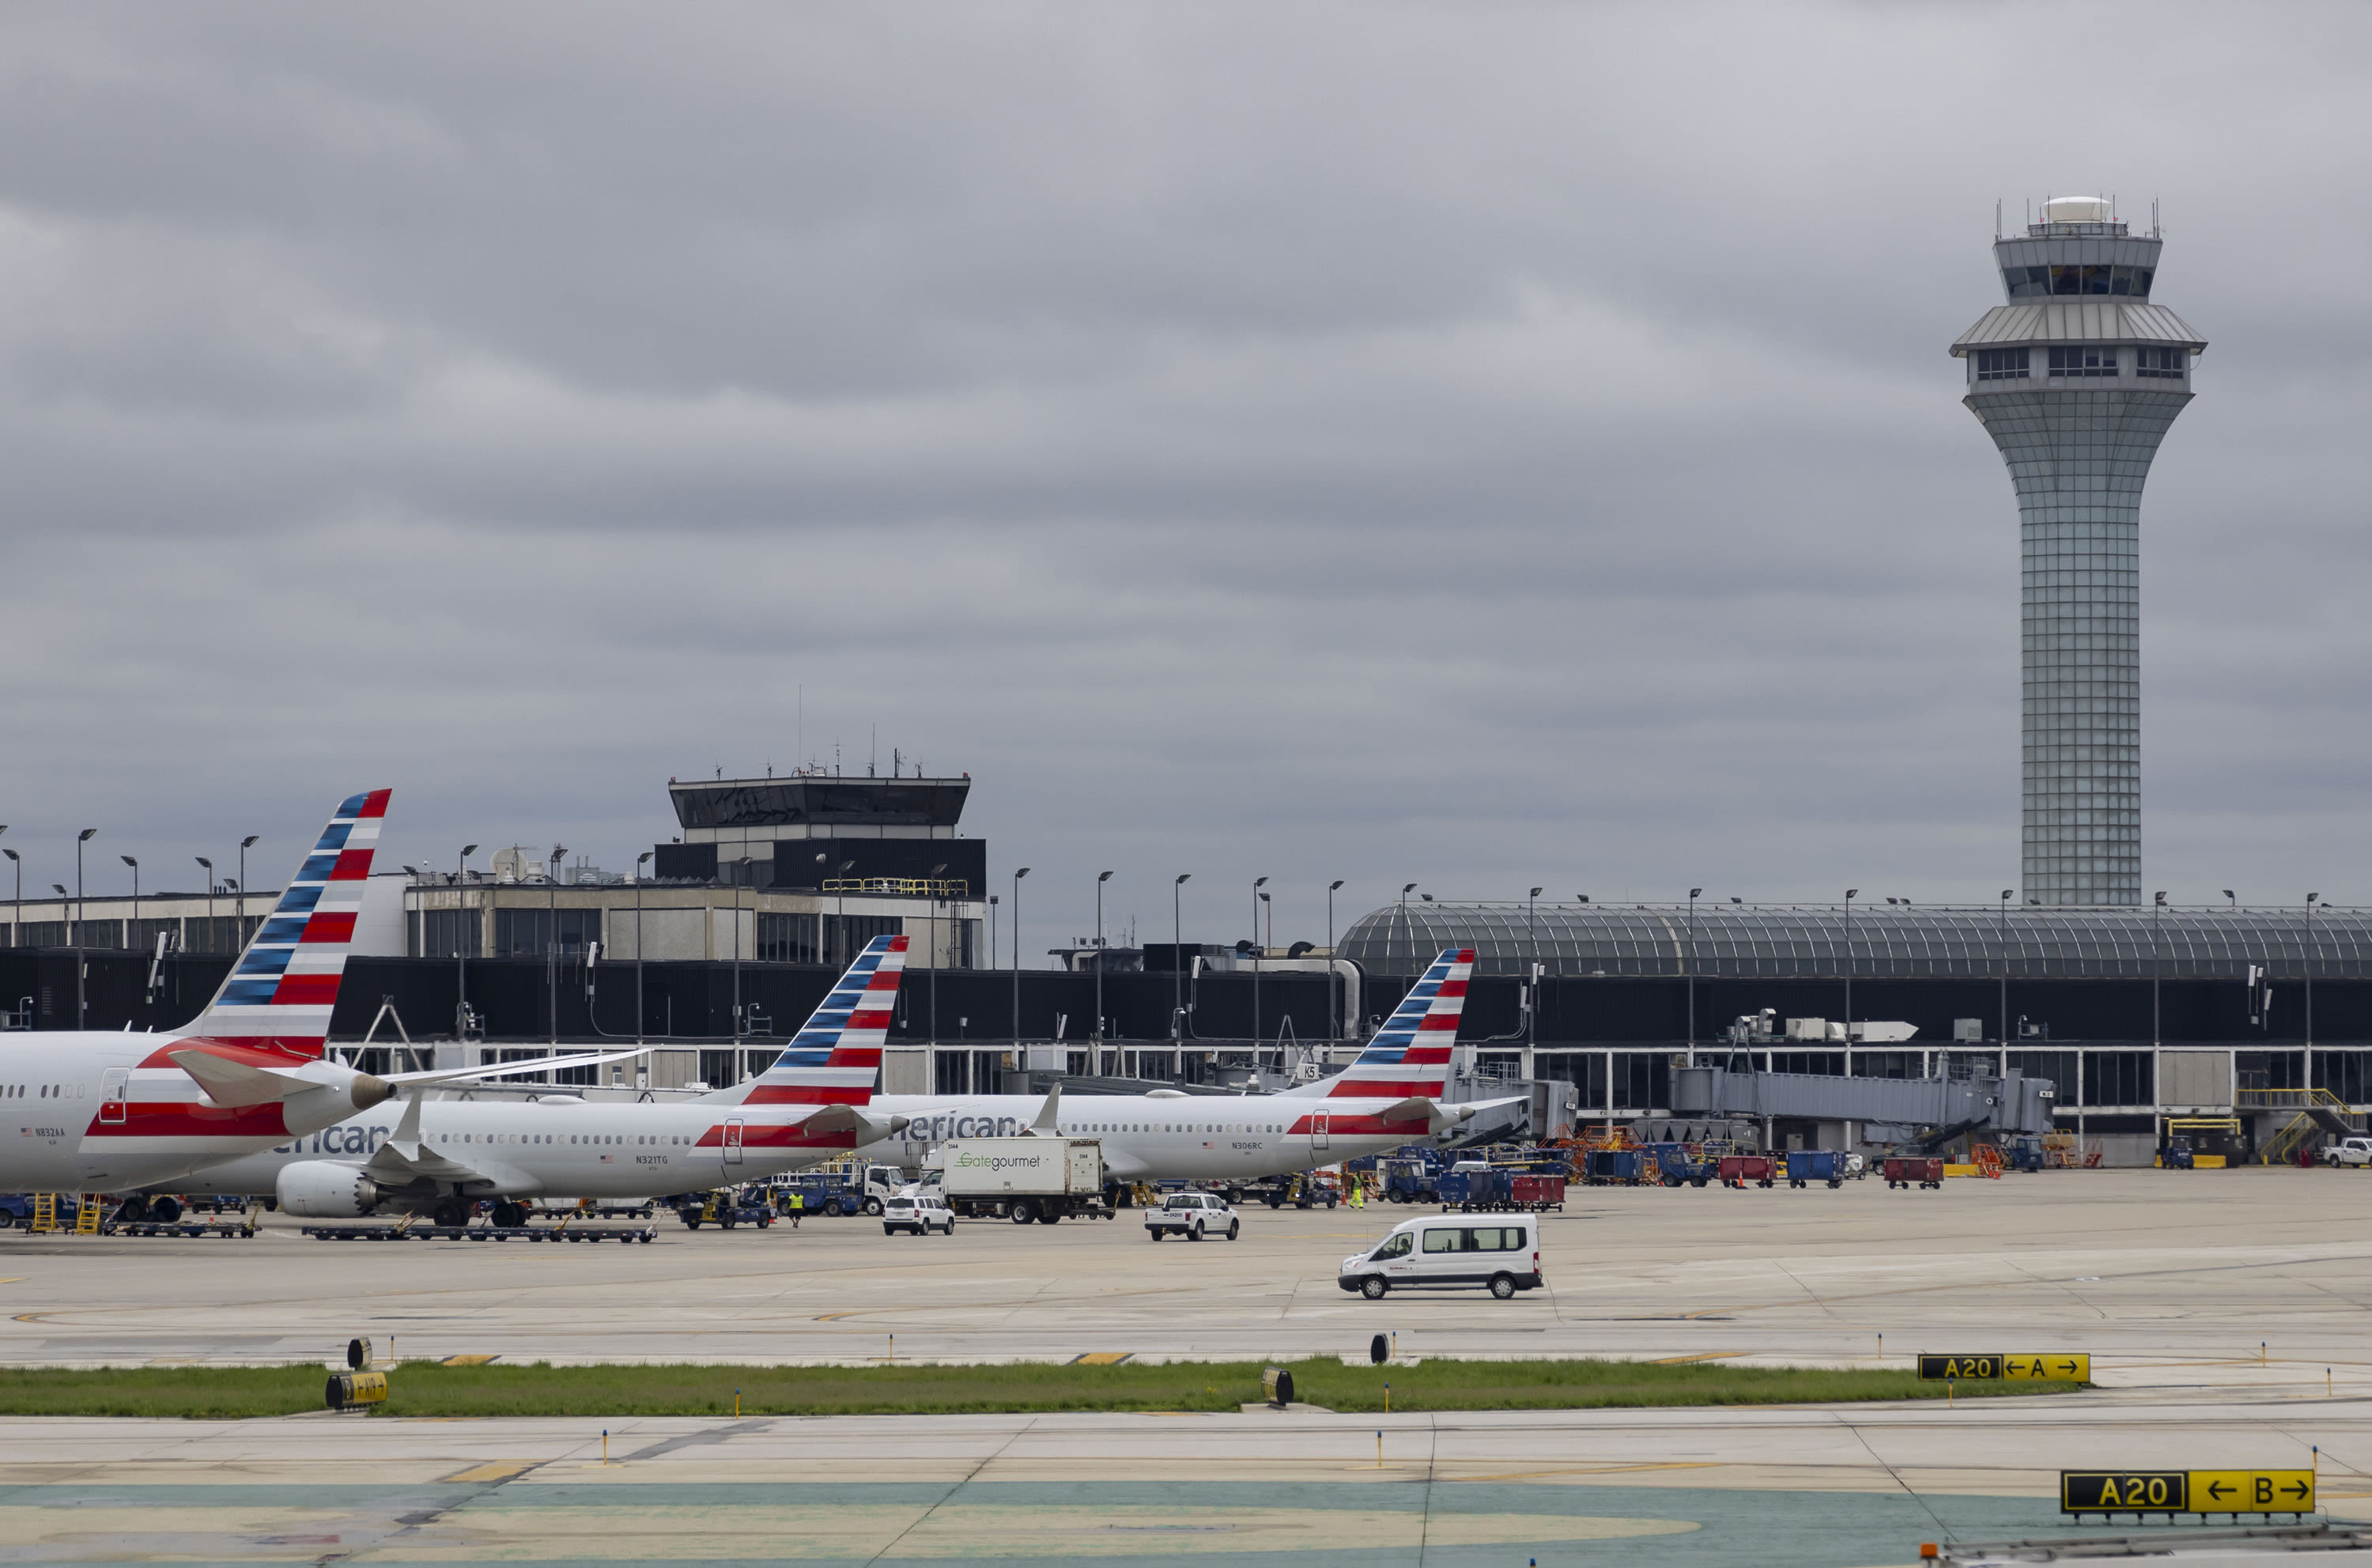 As O’Hare sheltered in place during storm, passengers rode the winds out aboard planes: ‘It felt very vulnerable’